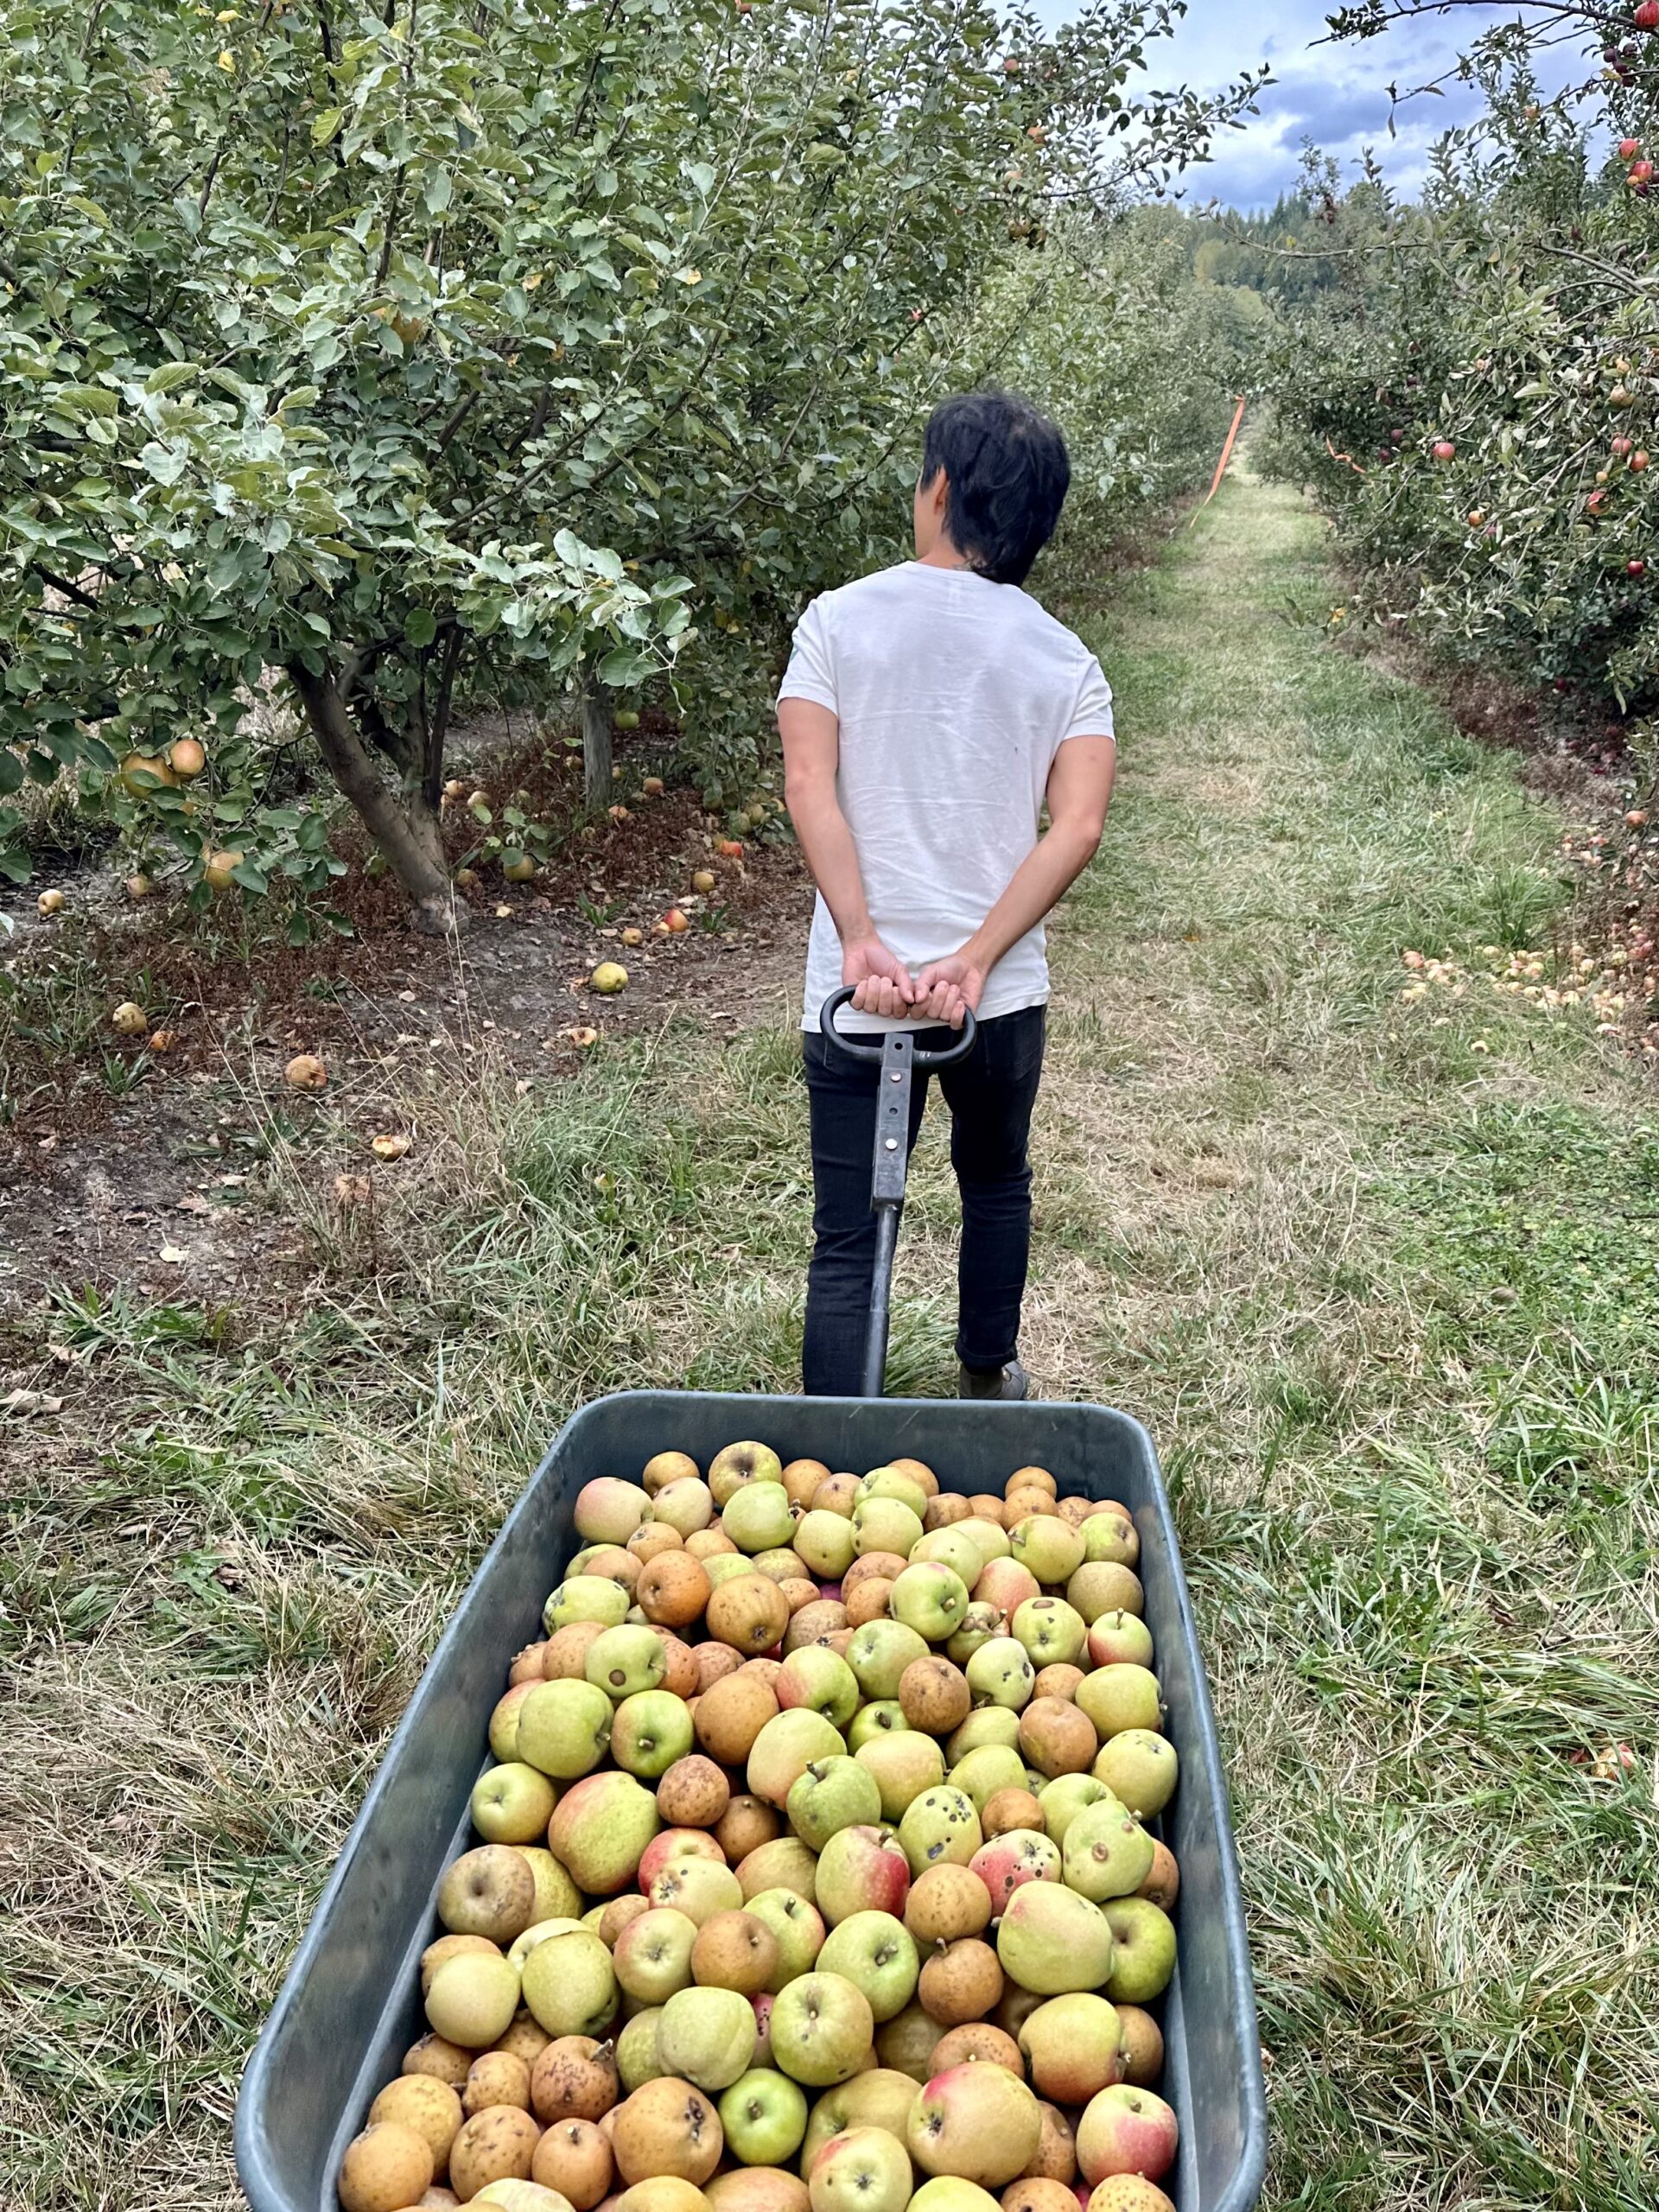 Howard walking through an orchard pulling a wagon full of apples